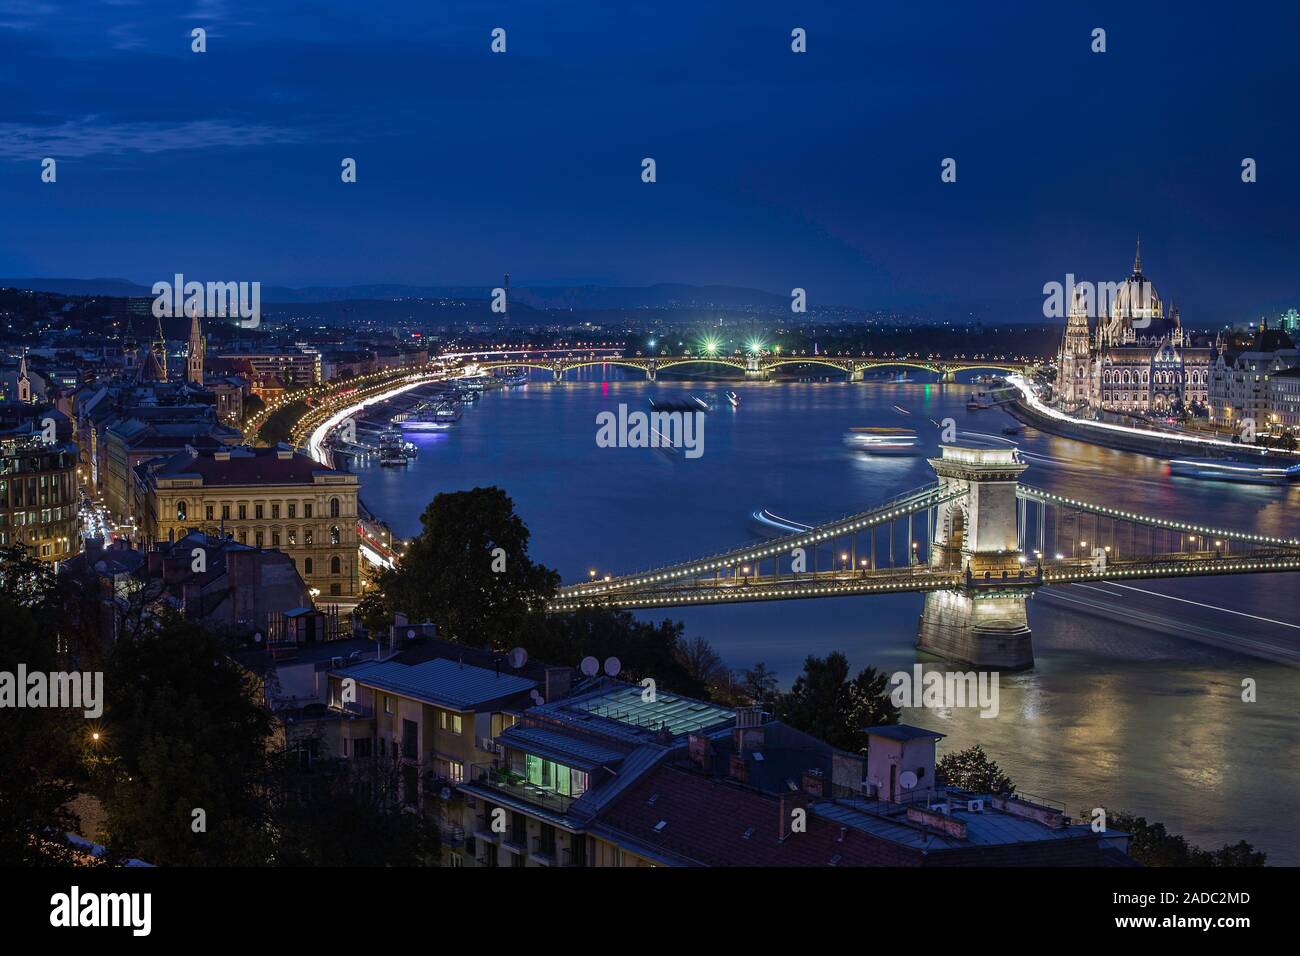 Budapest, Hungary - Illuminated Szechenyi Chain Bridge on a night photograph with Parliament of Hungary, moving ships on River Danube and clear dark b Stock Photo